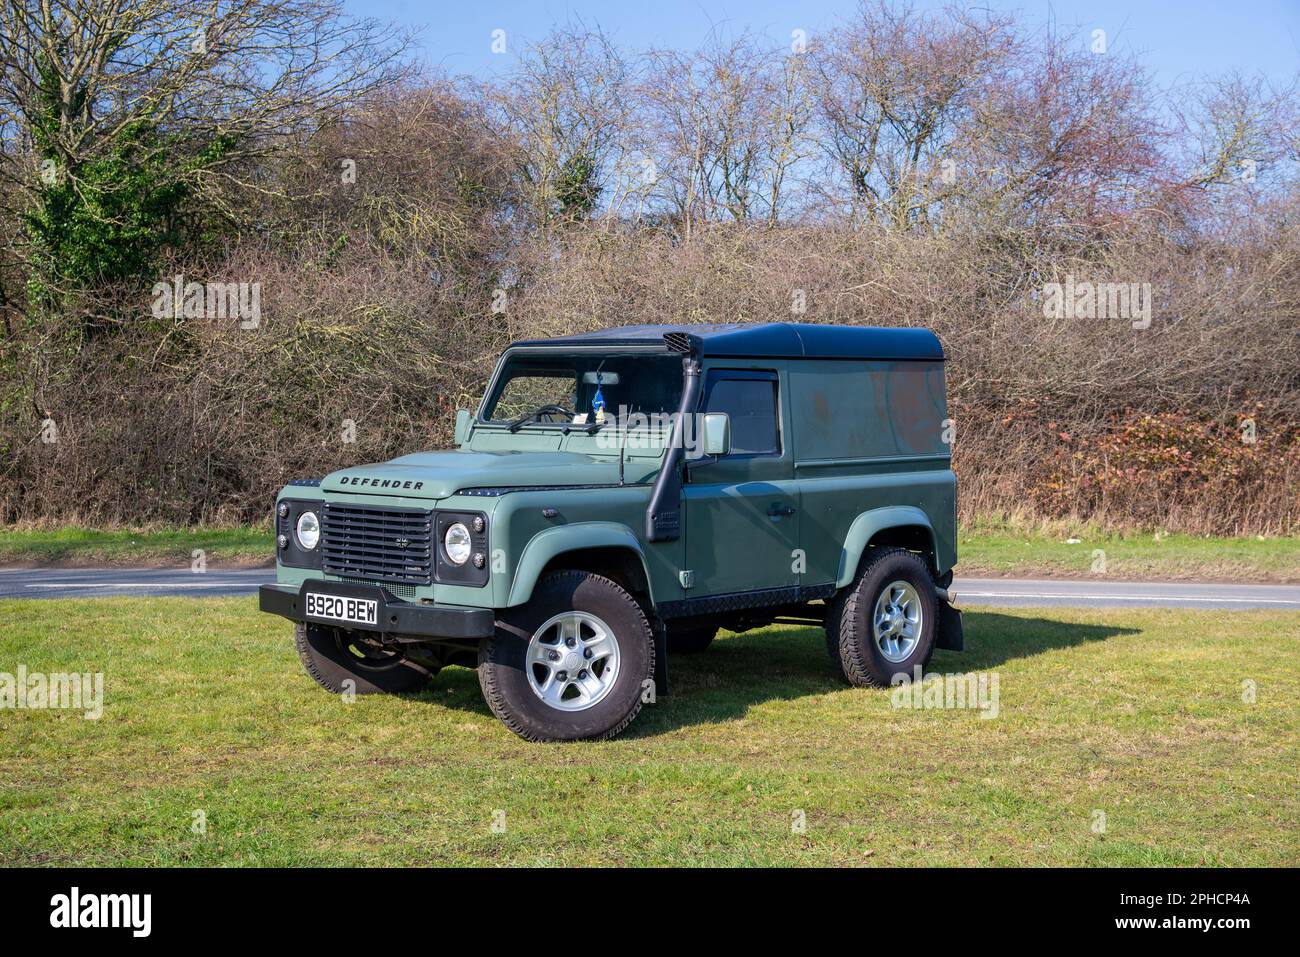 Green Land Rover Defender equipped with five-spoke alloy wheels and snorkel, parked on grass with a country lane and trees behind Stock Photo